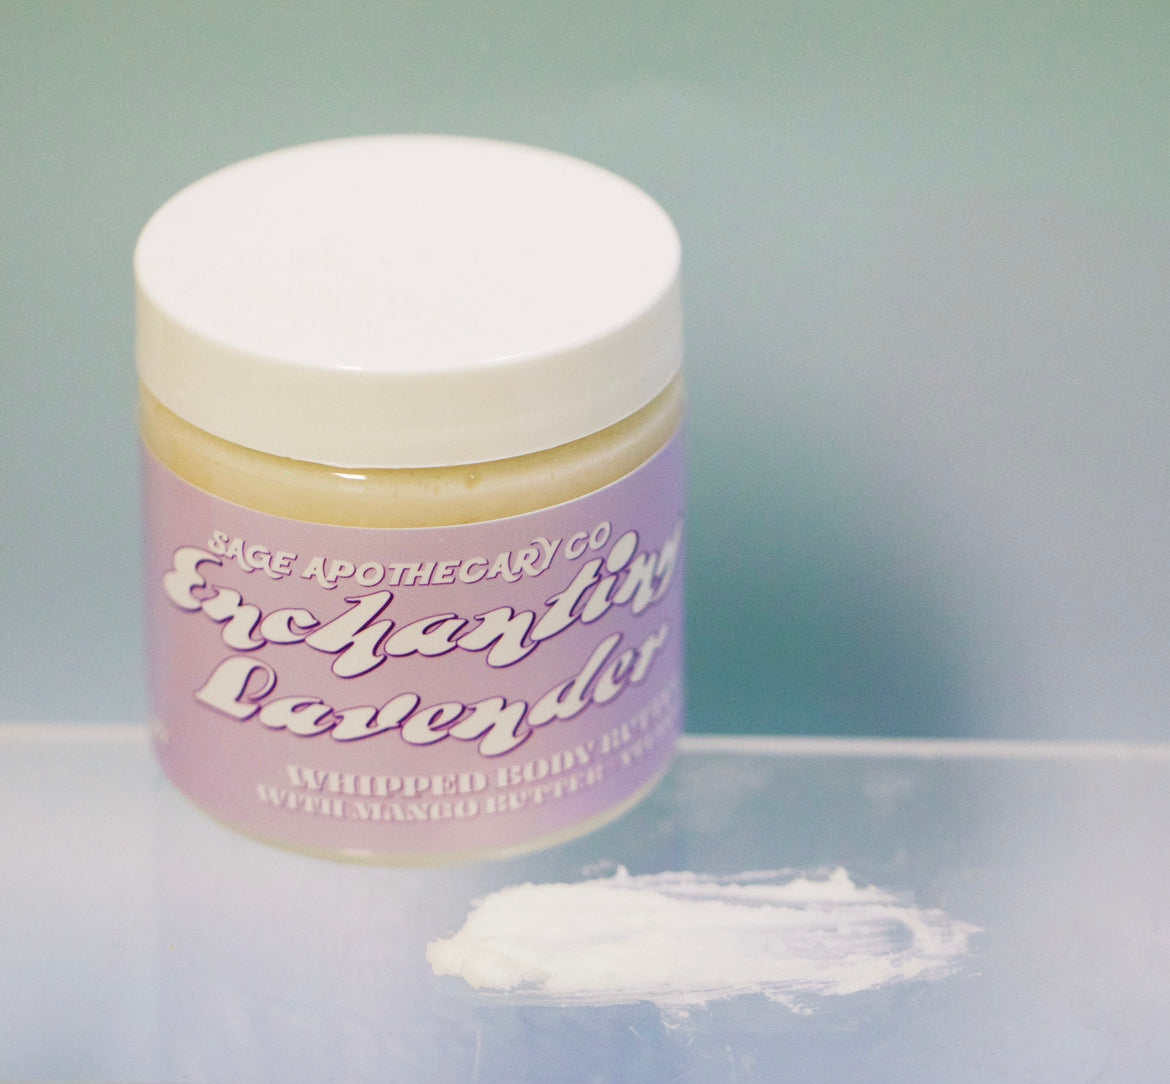 ENCHANTED LAVENDER BODY BUTTER